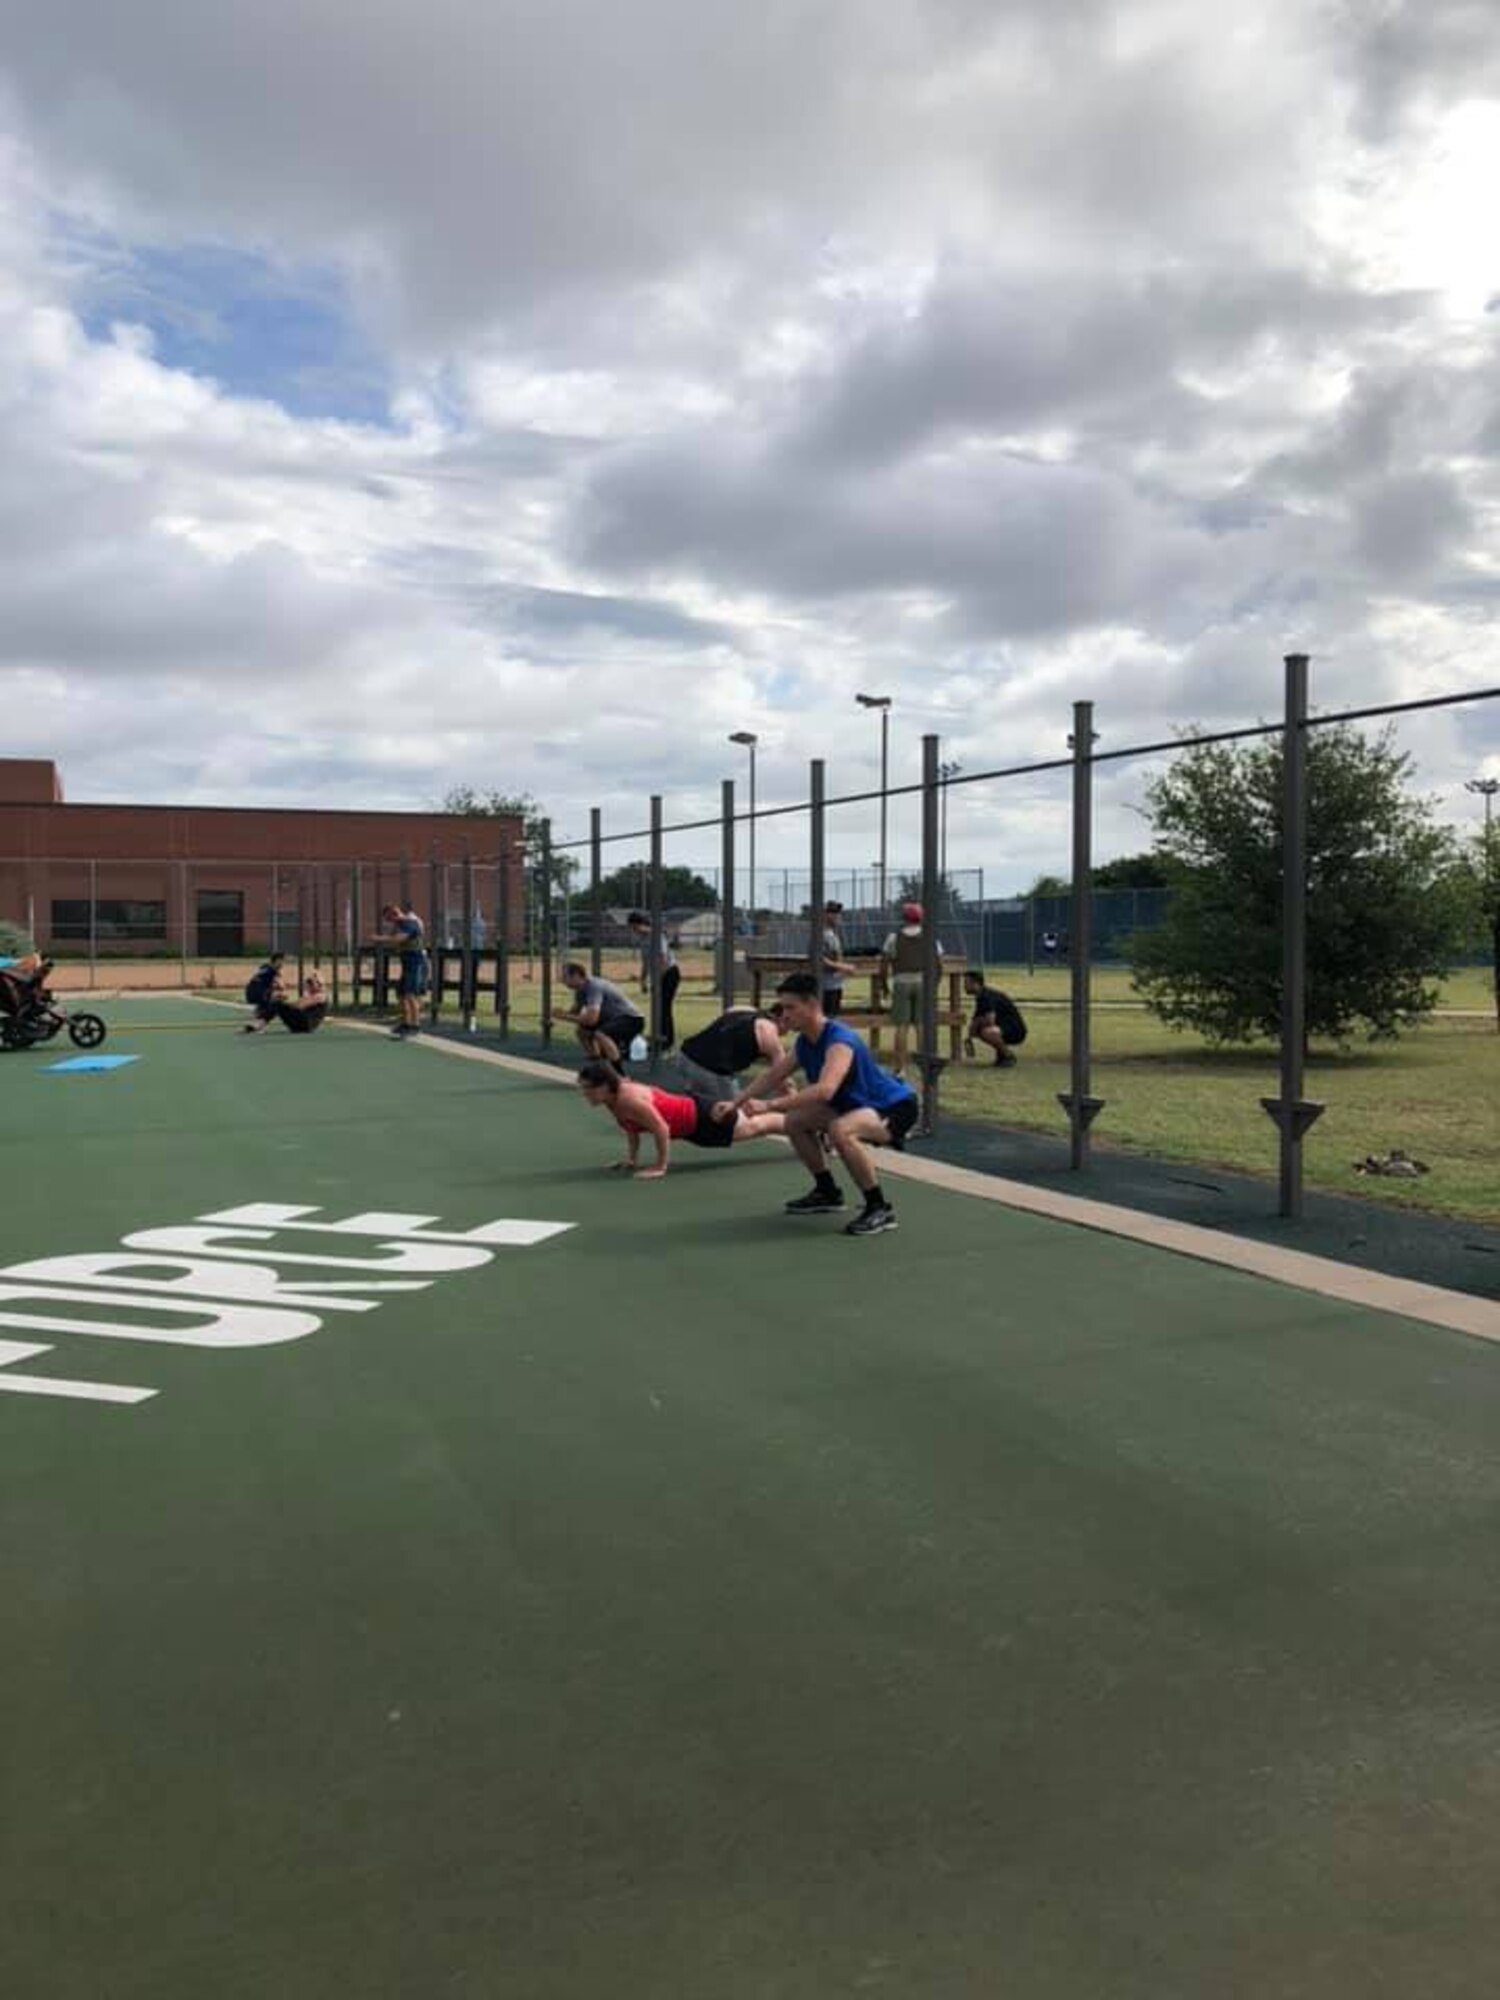 Members of Goodfellow participate in The Murph Challenge at the Mathis Fitness Center on Goodfellow Air Force Base, Texas, May 25, 2020. The challenge consists of a one-mile run followed by 100 pull-ups, 200 push-ups, 300 air squats, and finished with a one-mile run, all while wearing a 20-pound vest. (Courtesy photo)